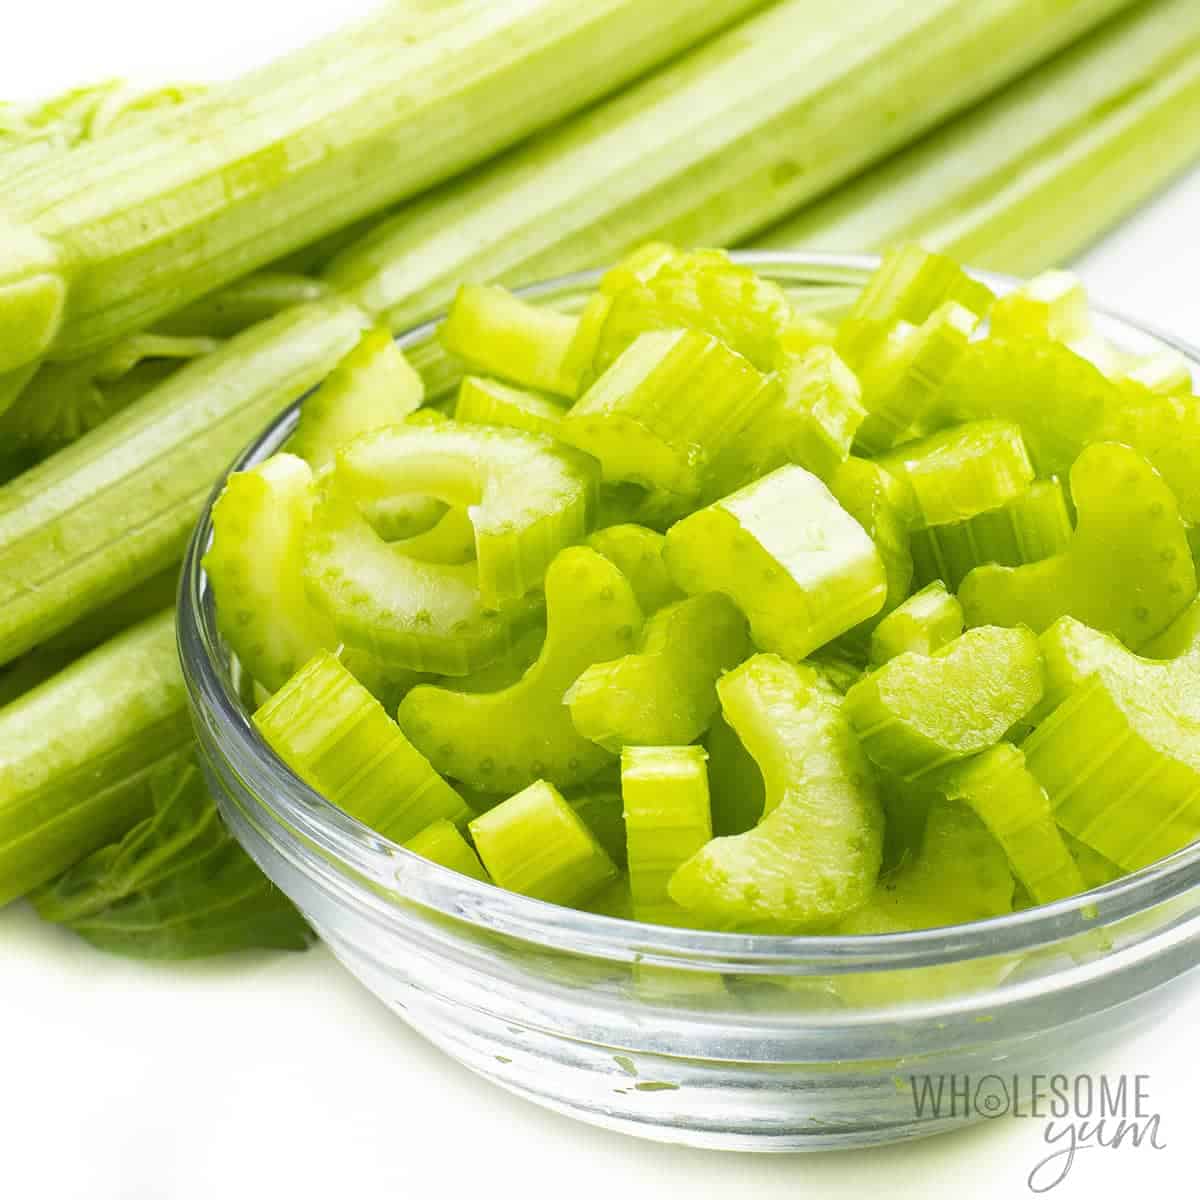 Is celery keto? This chopped celery in a bowl is keto friendly.